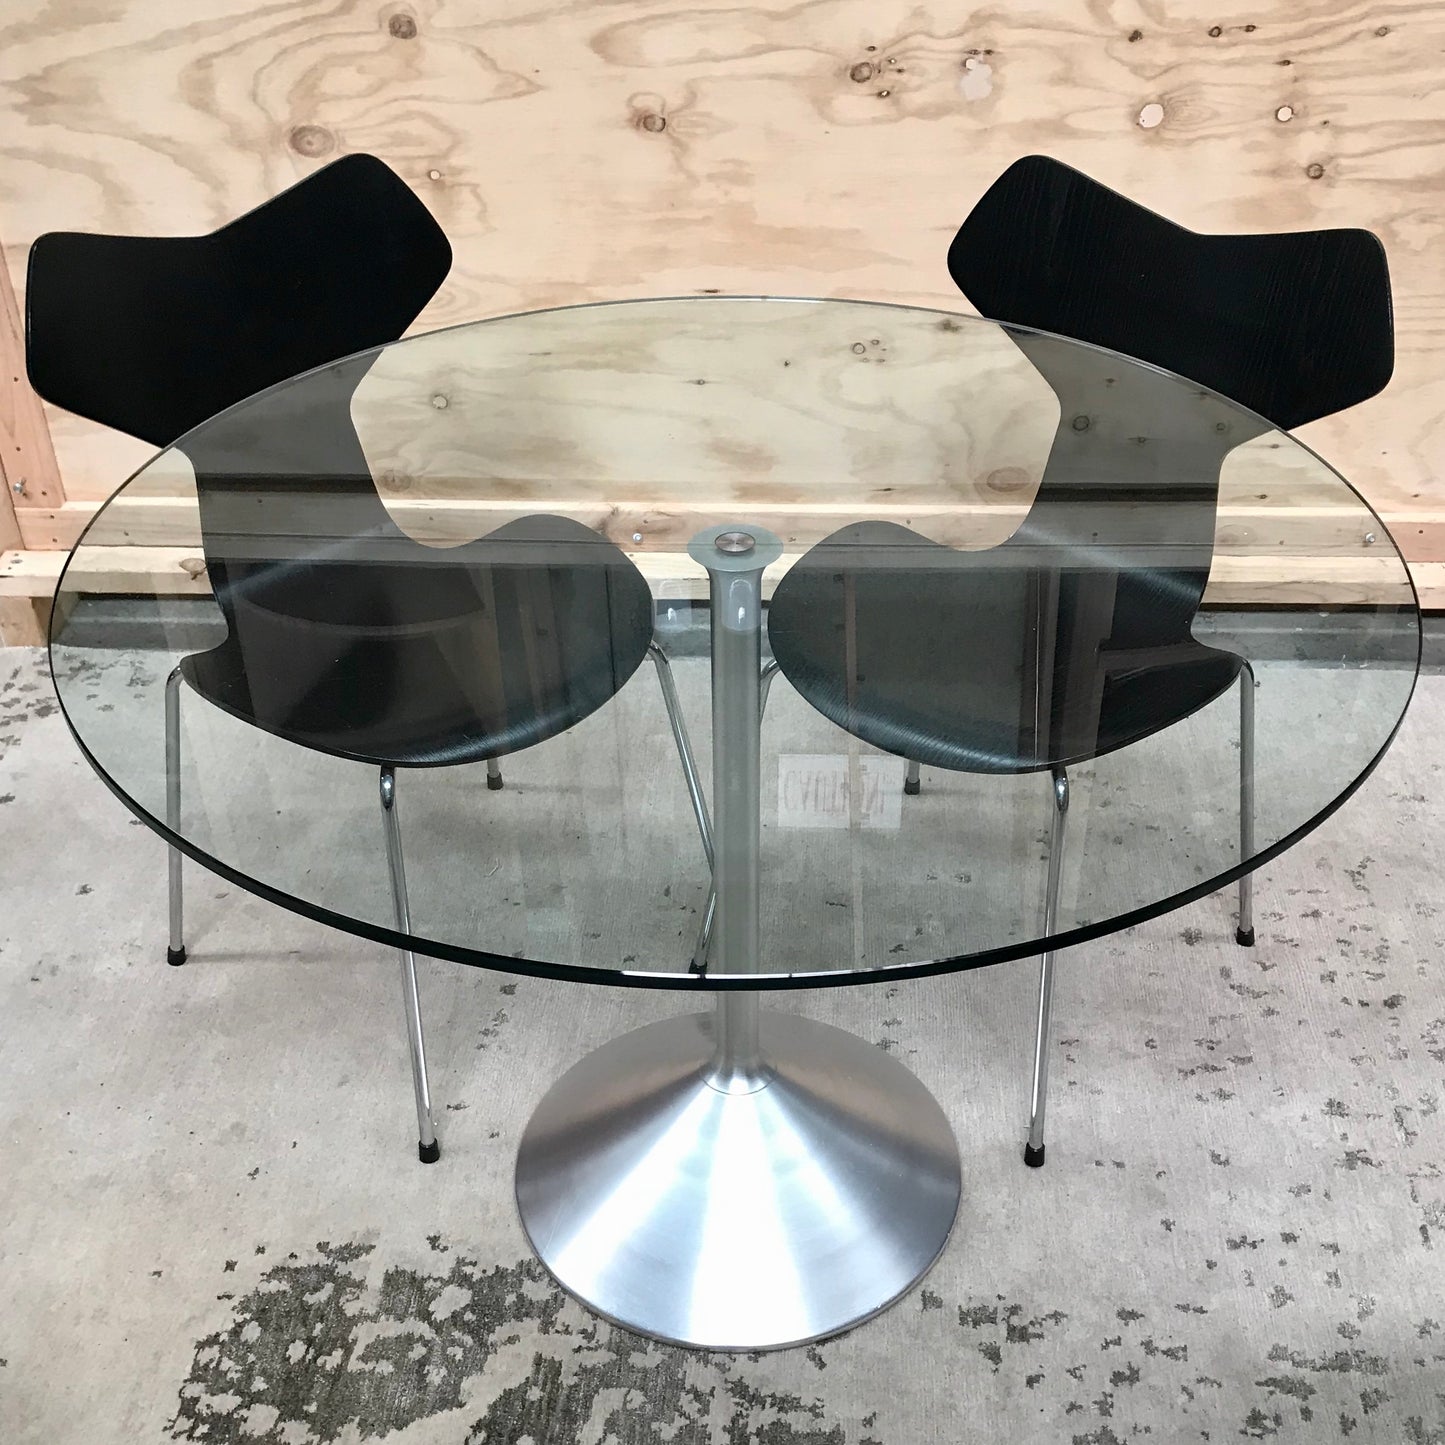 Load image into Gallery viewer, Ugi Dining Table by Thomas Jacobsen
